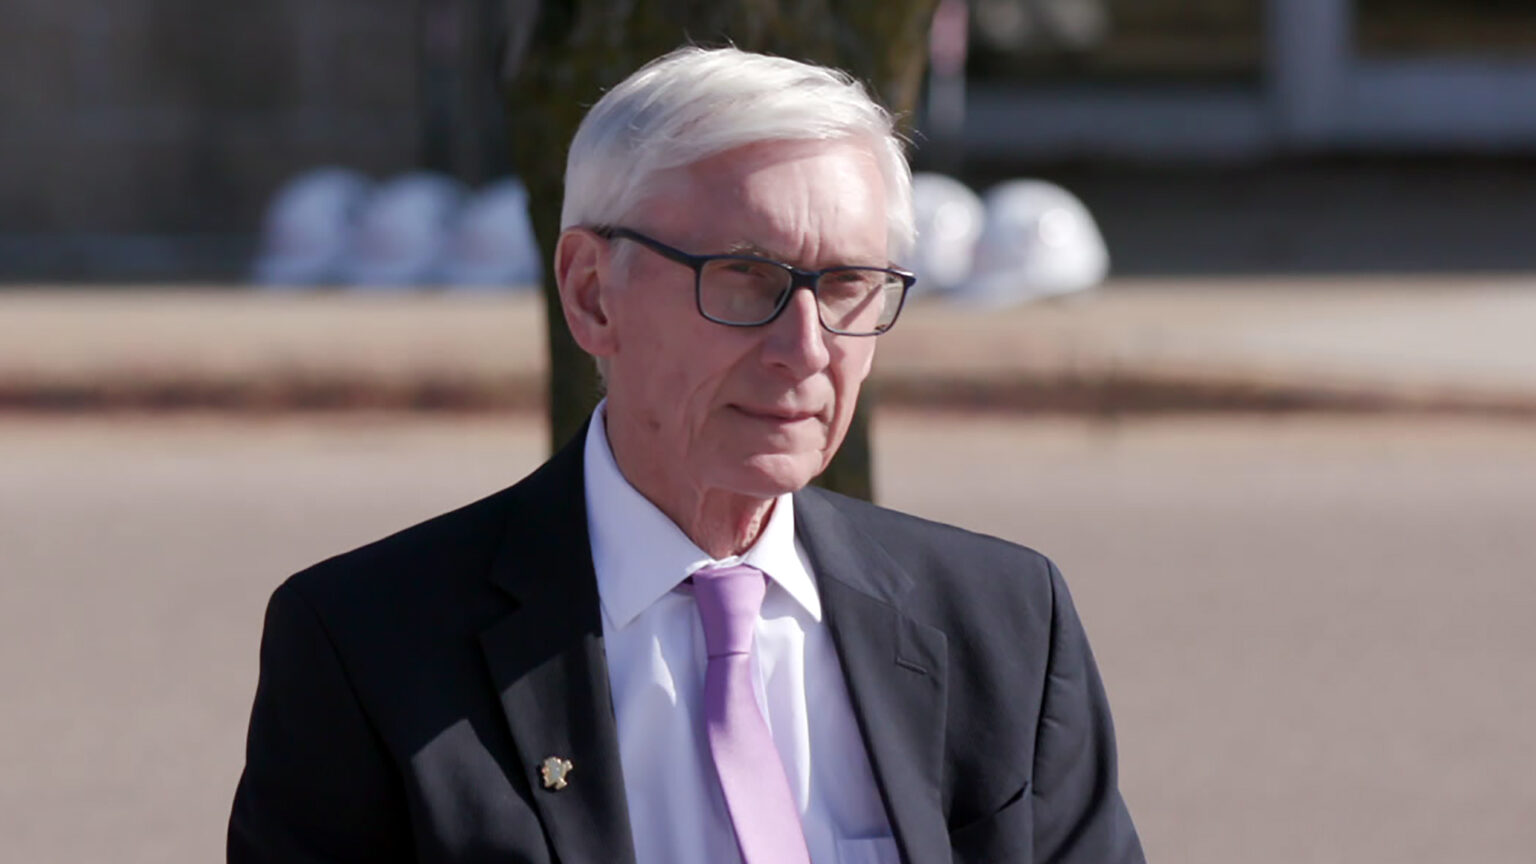 Tony Evers sits outdoors with sunshine illuminating his face with an out-of-focus tree trunk and row of safety helmets on a sidewalk in the background.